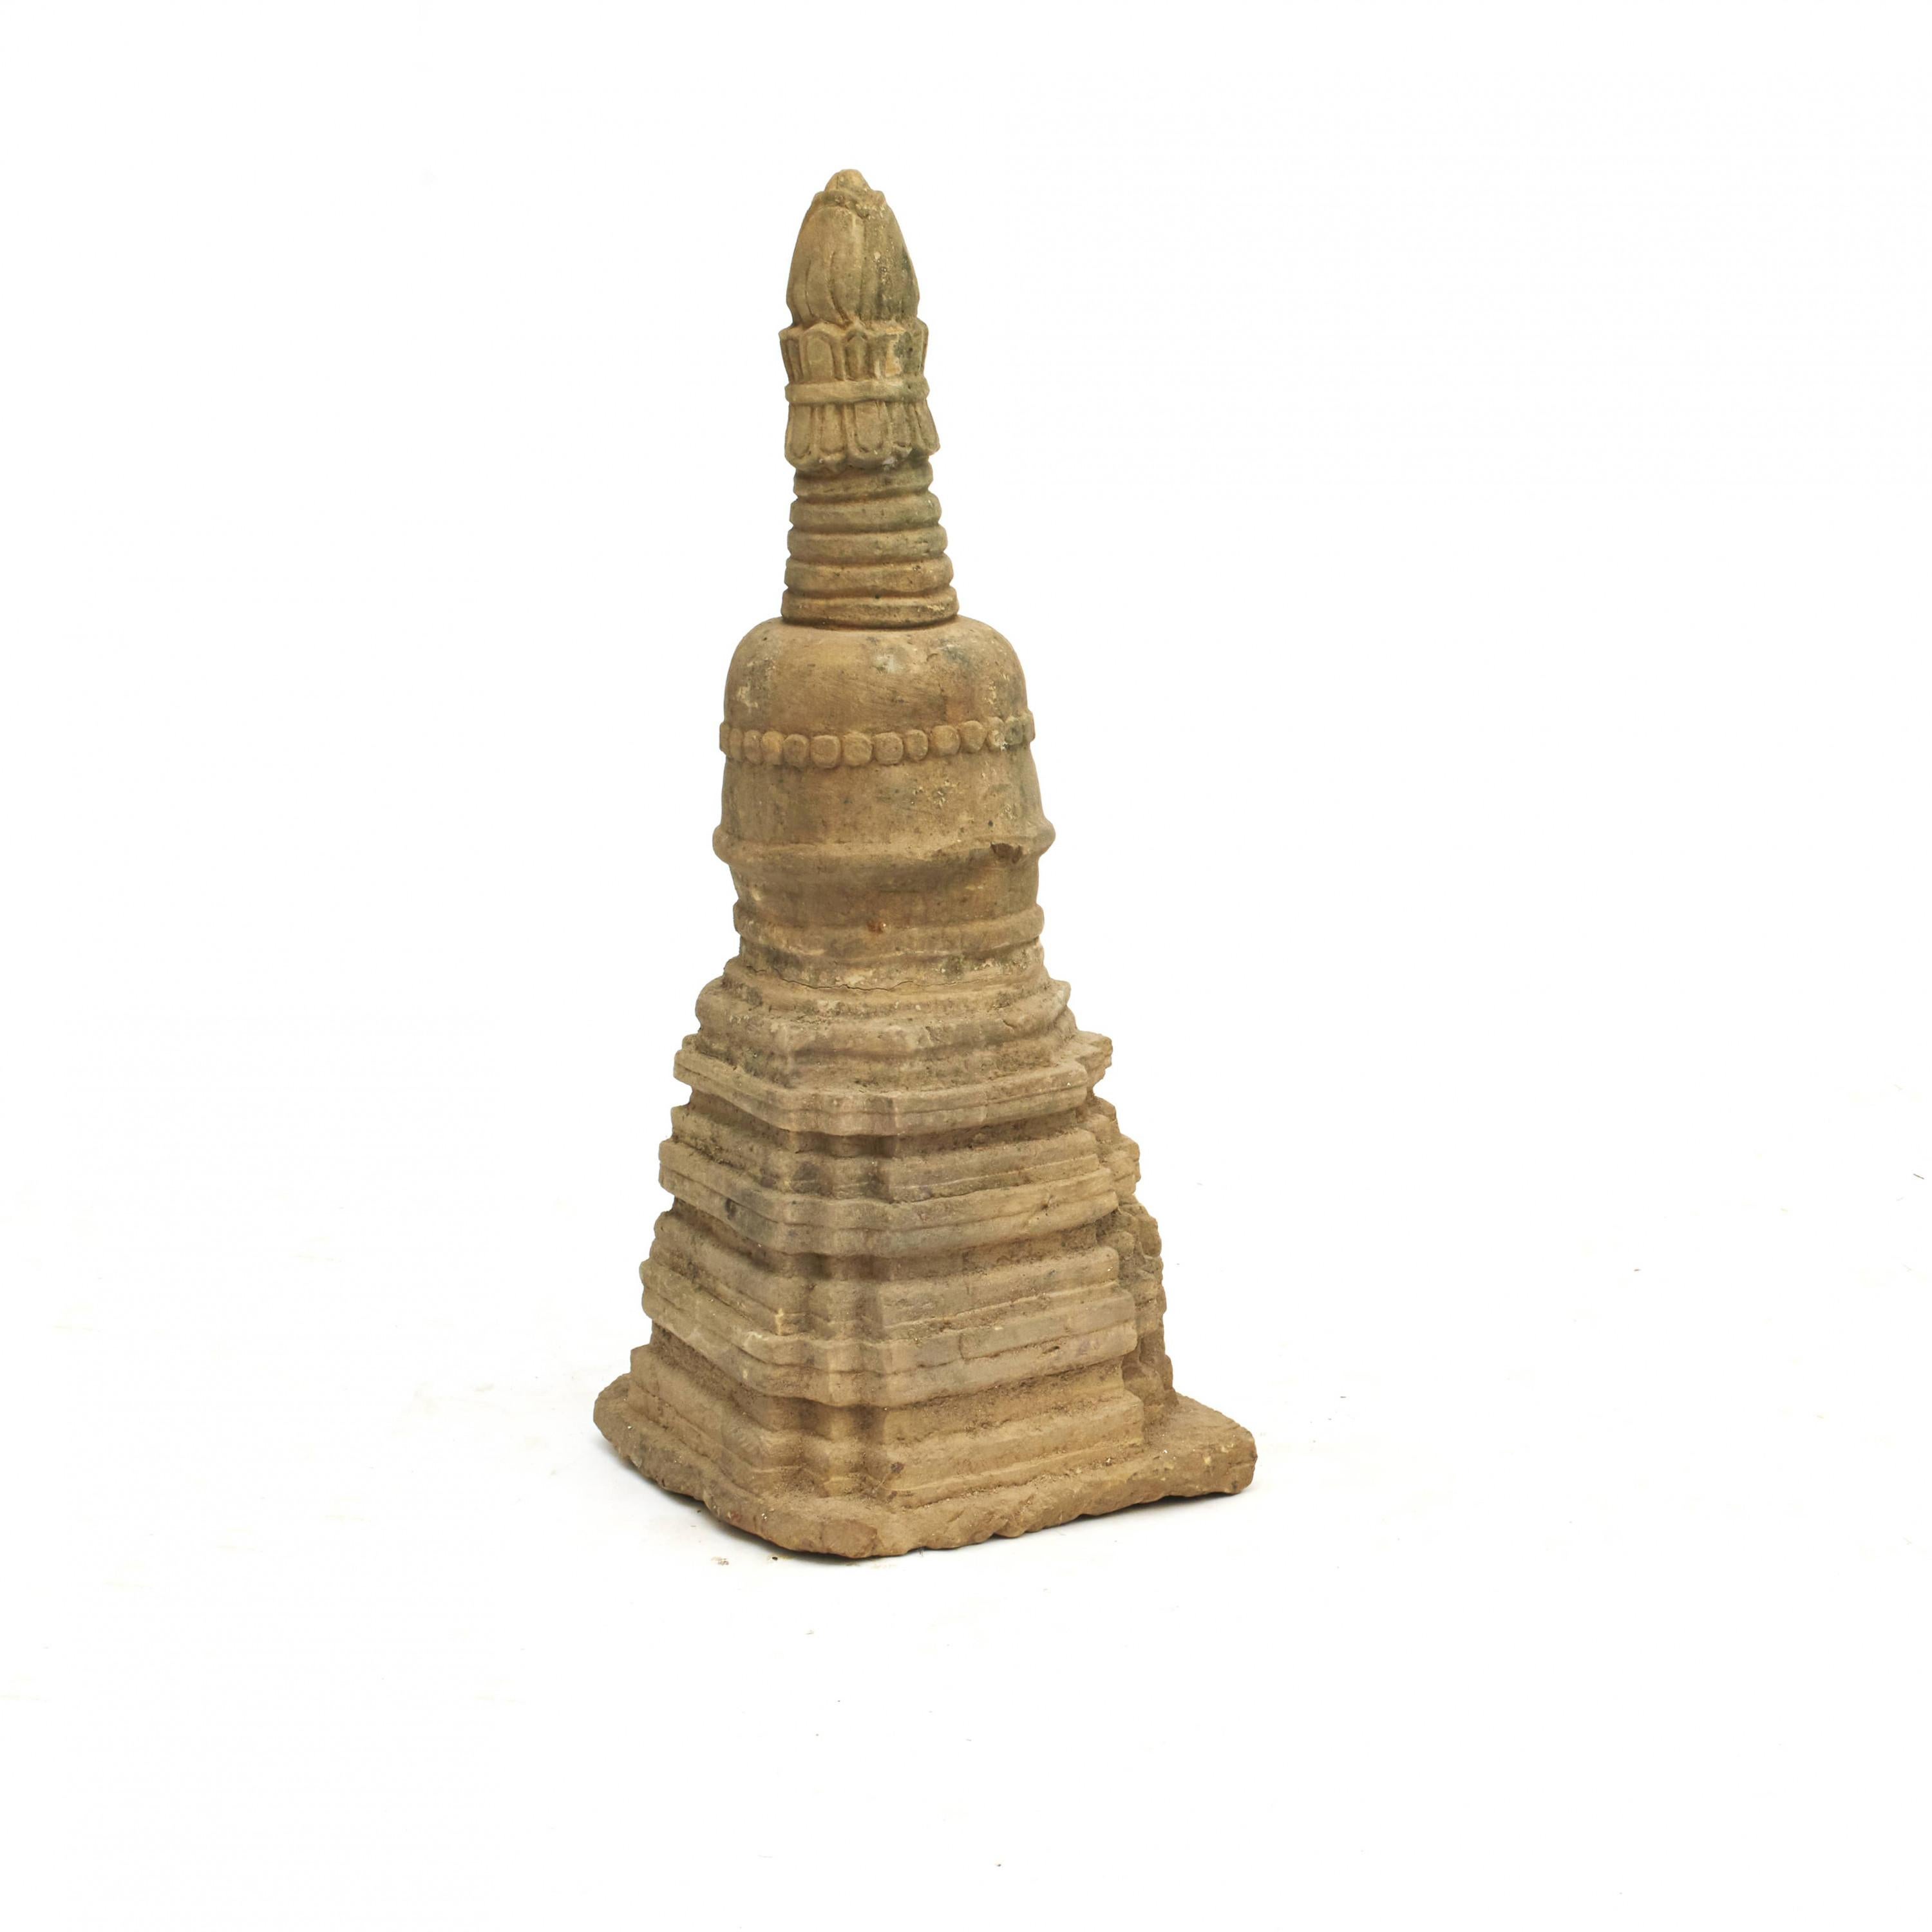 Other Rare 400-600 Year Old Burmese Sandstone Stupa Pagoda Sculpture For Sale